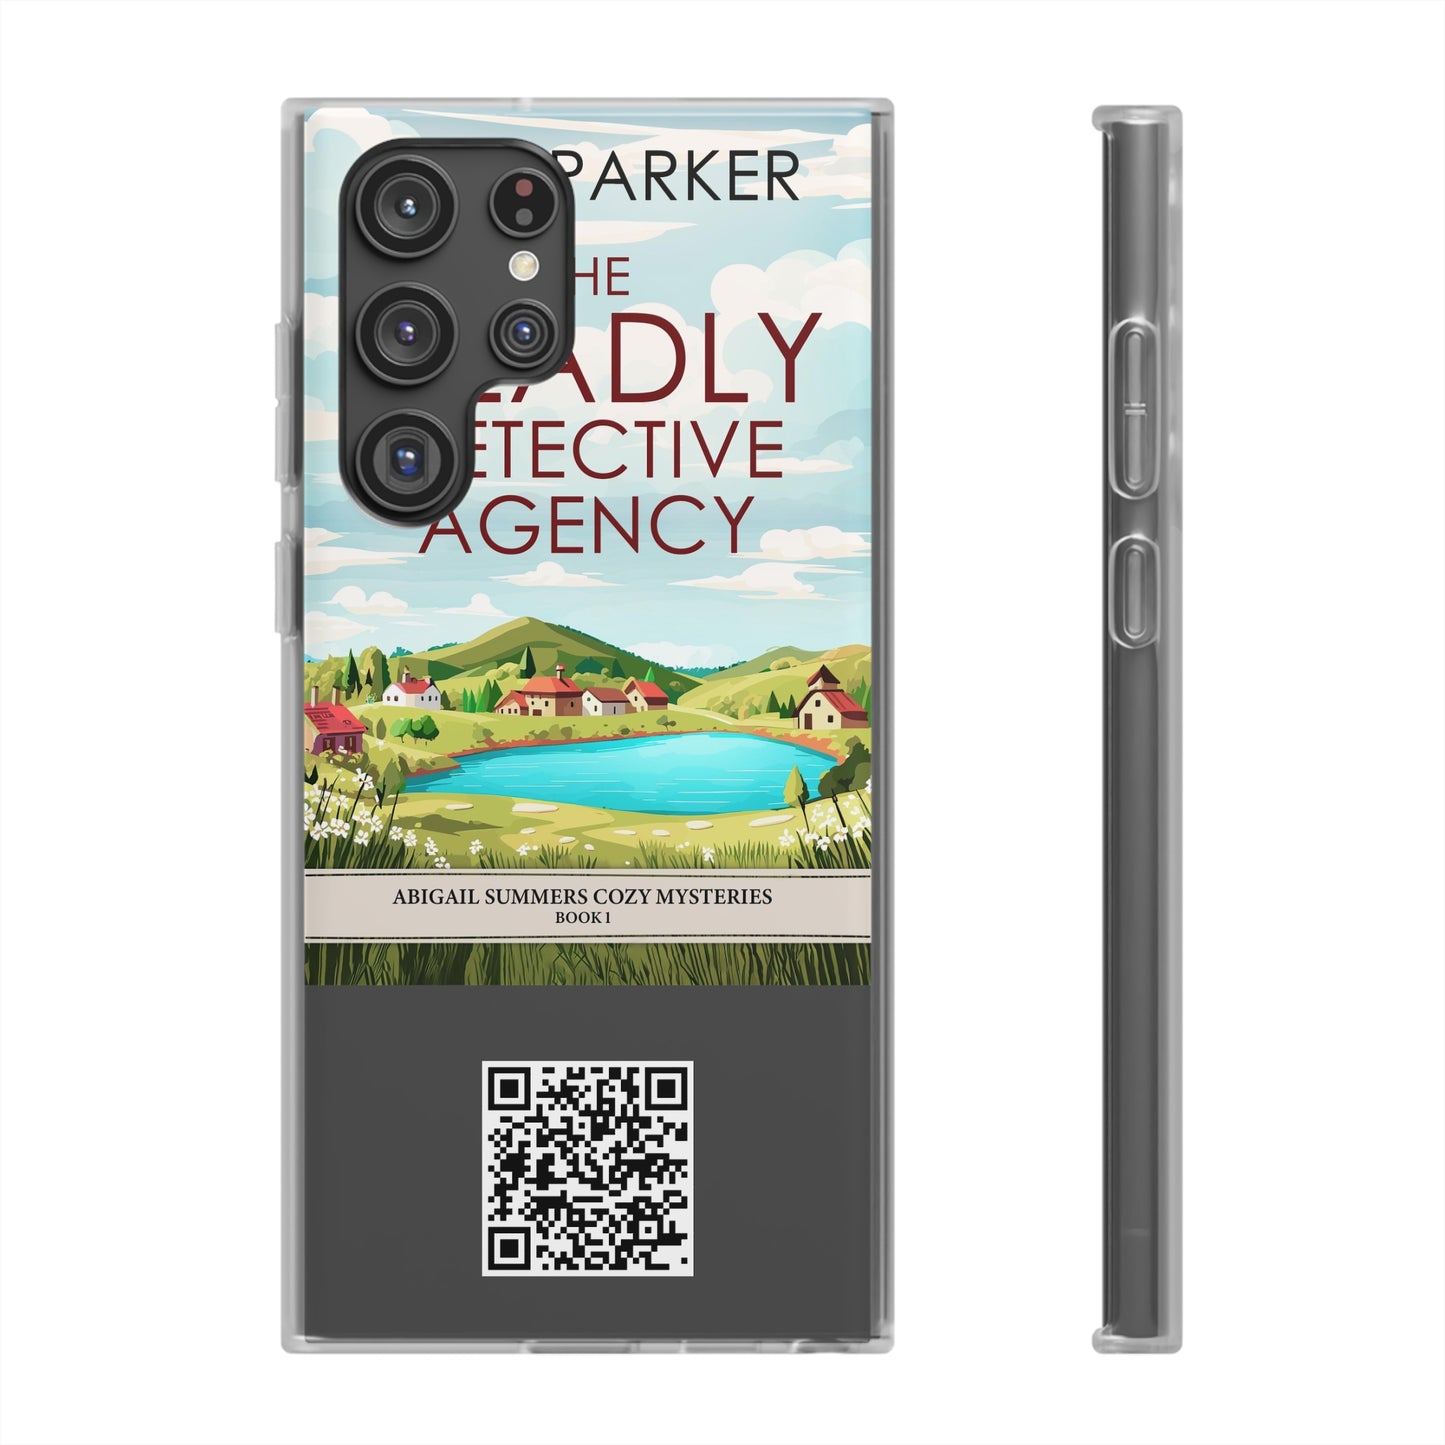 The Deadly Detective Agency - Flexible Phone Case